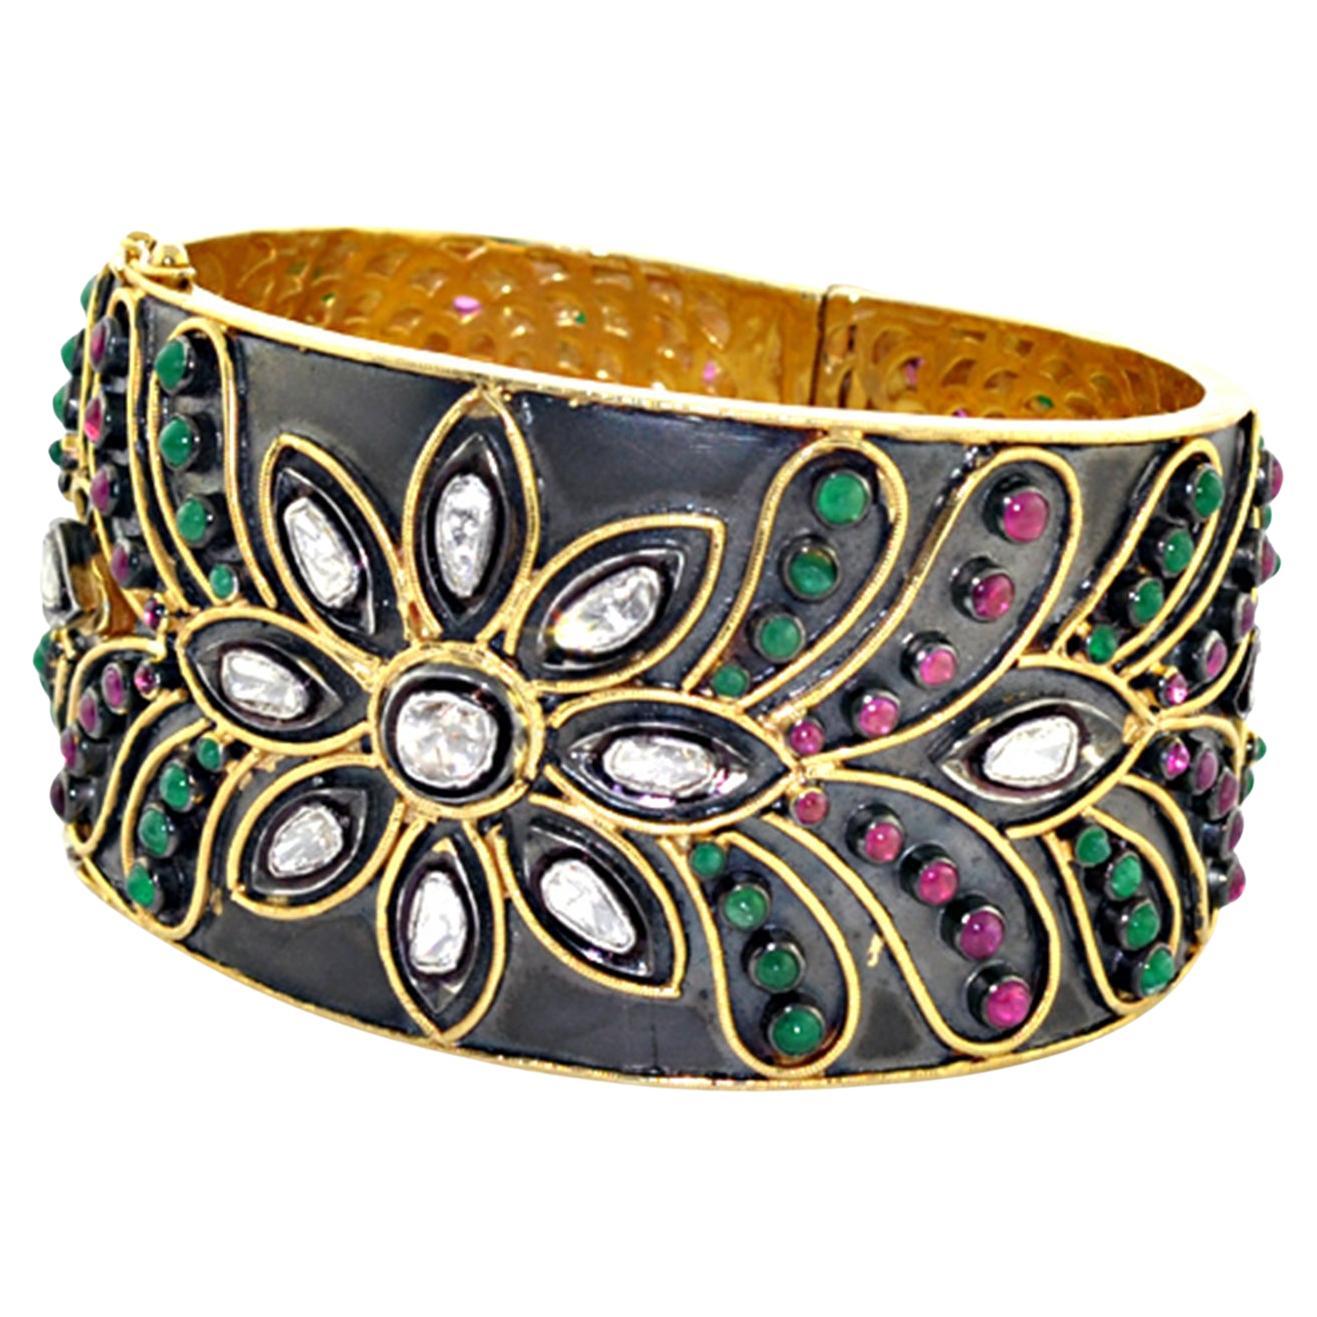 Precious Stones Studded Ethnic Looking Bracelet With Diamonds In 14k Yellow Gold For Sale